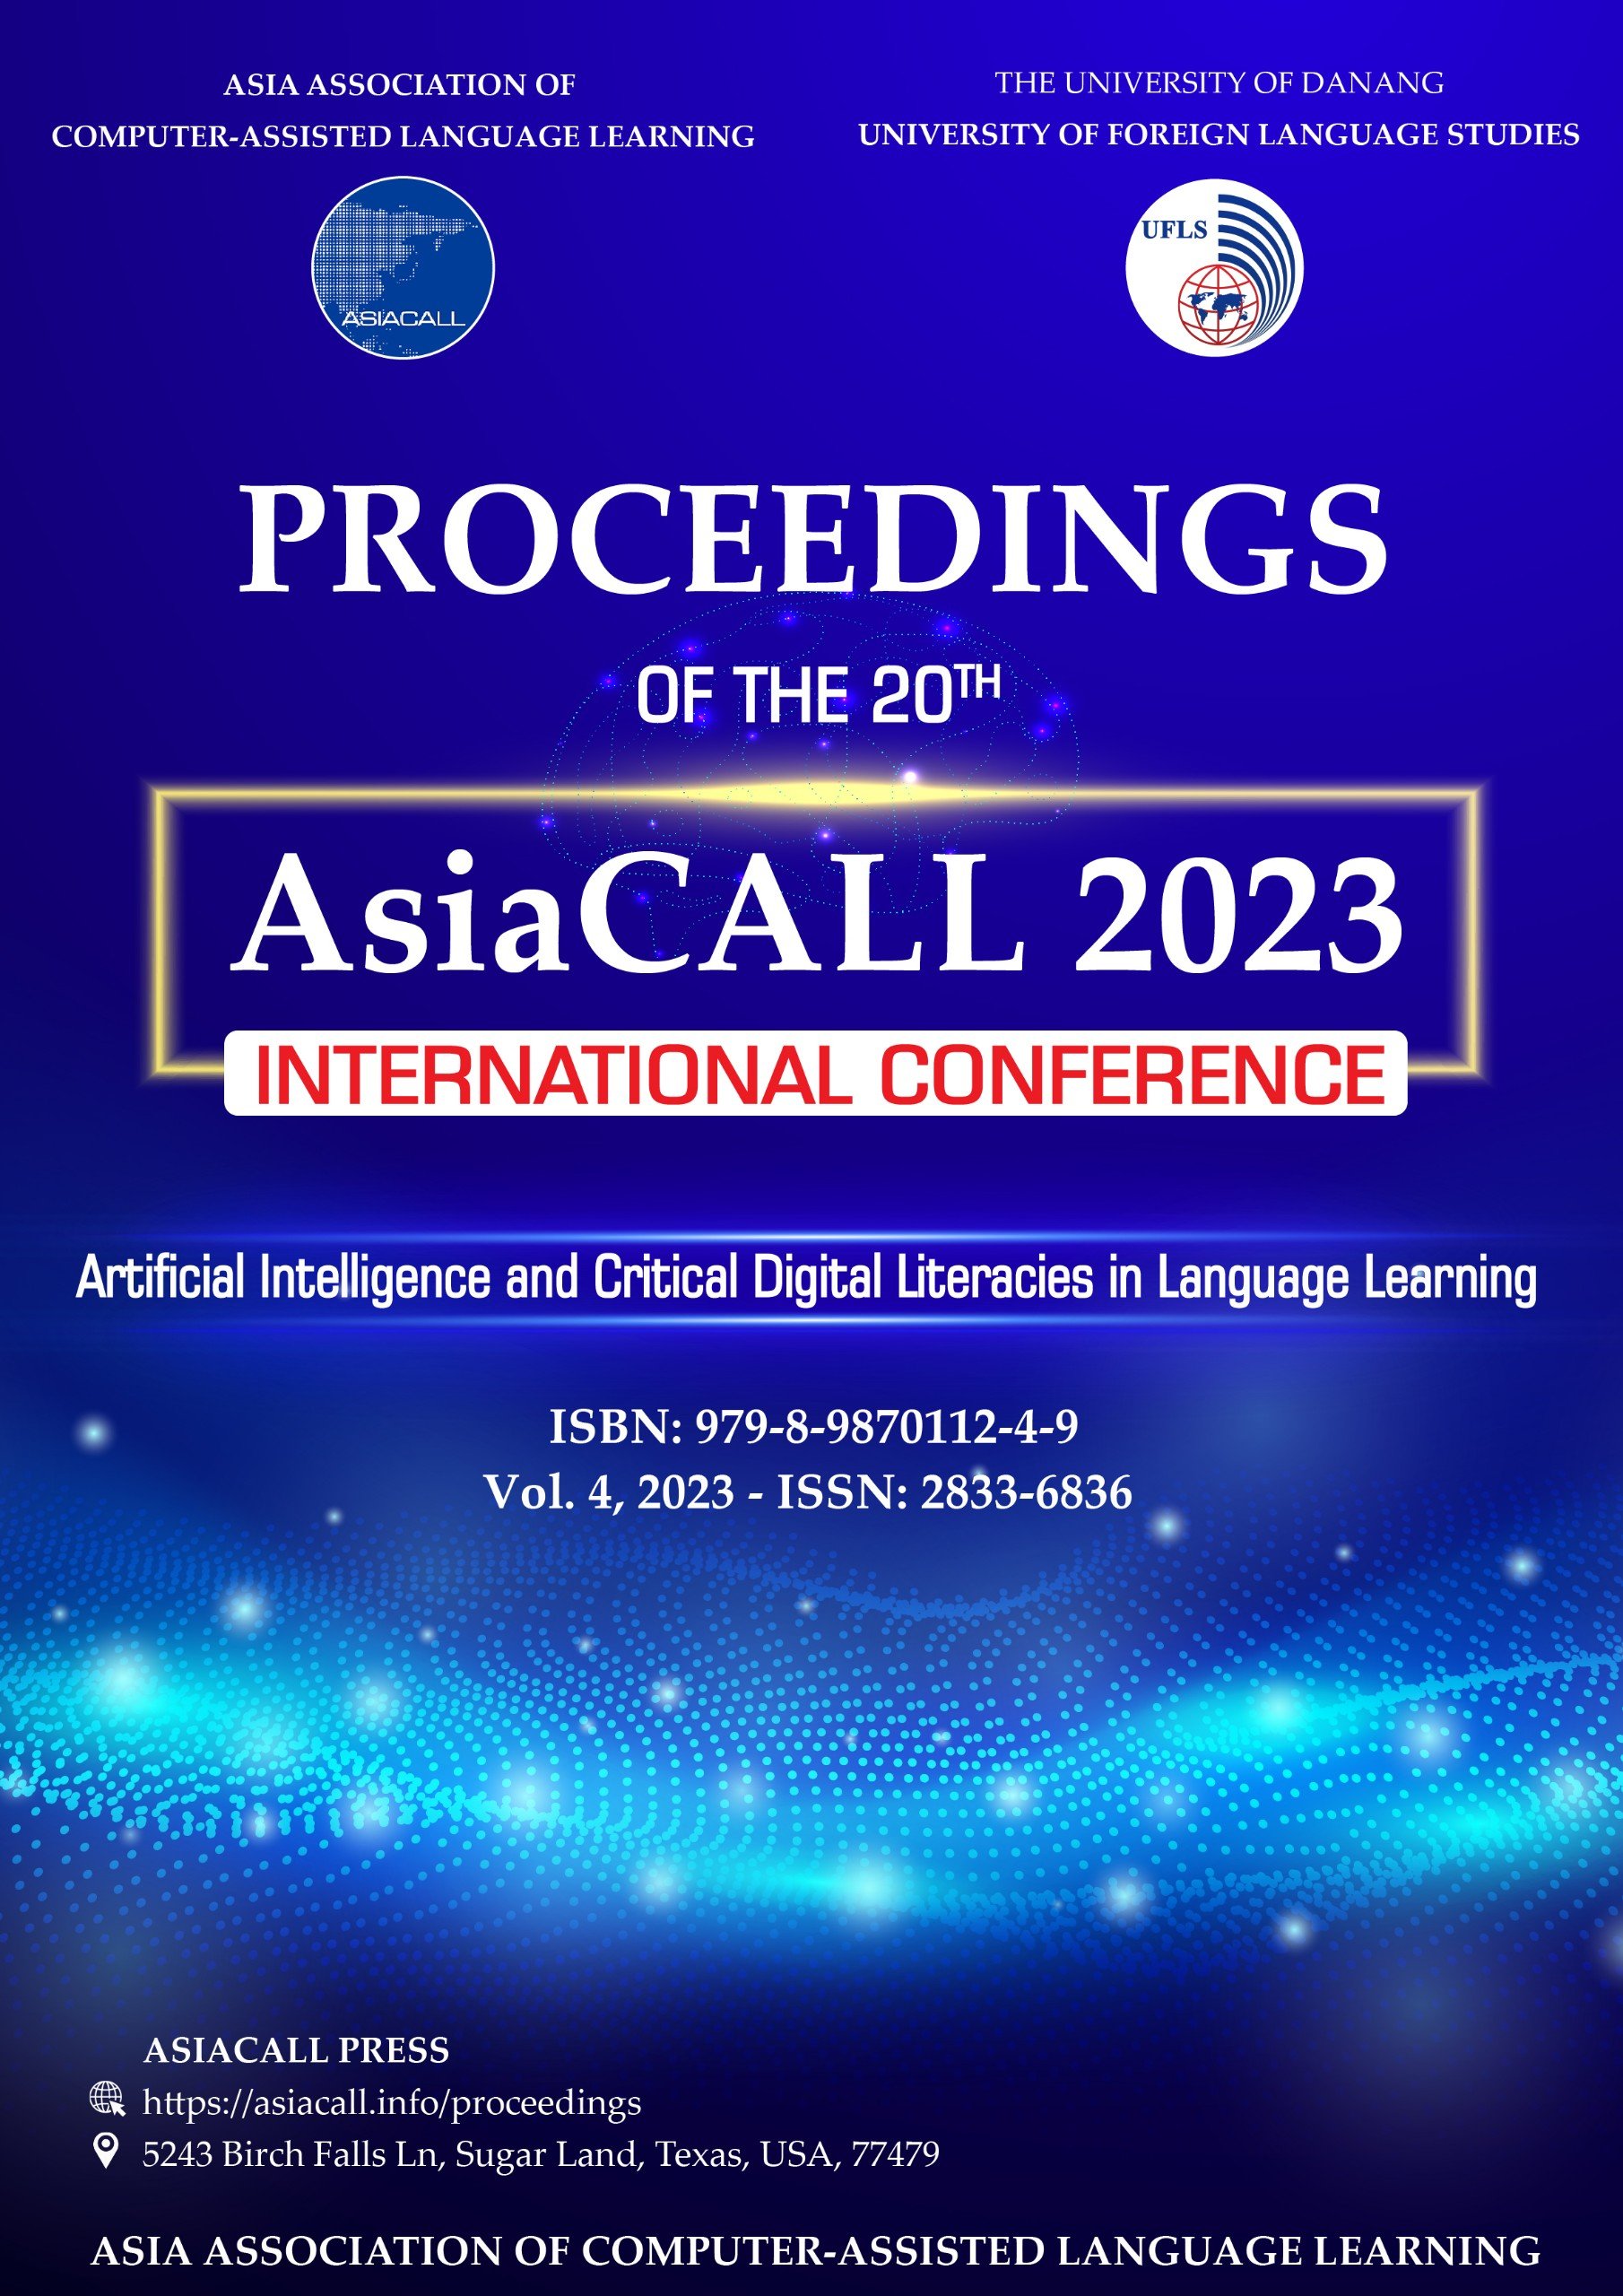                     View Vol. 4 (2023): Proceedings of the 20th AsiaCALL International Conference (AsiaCALL2023)
                